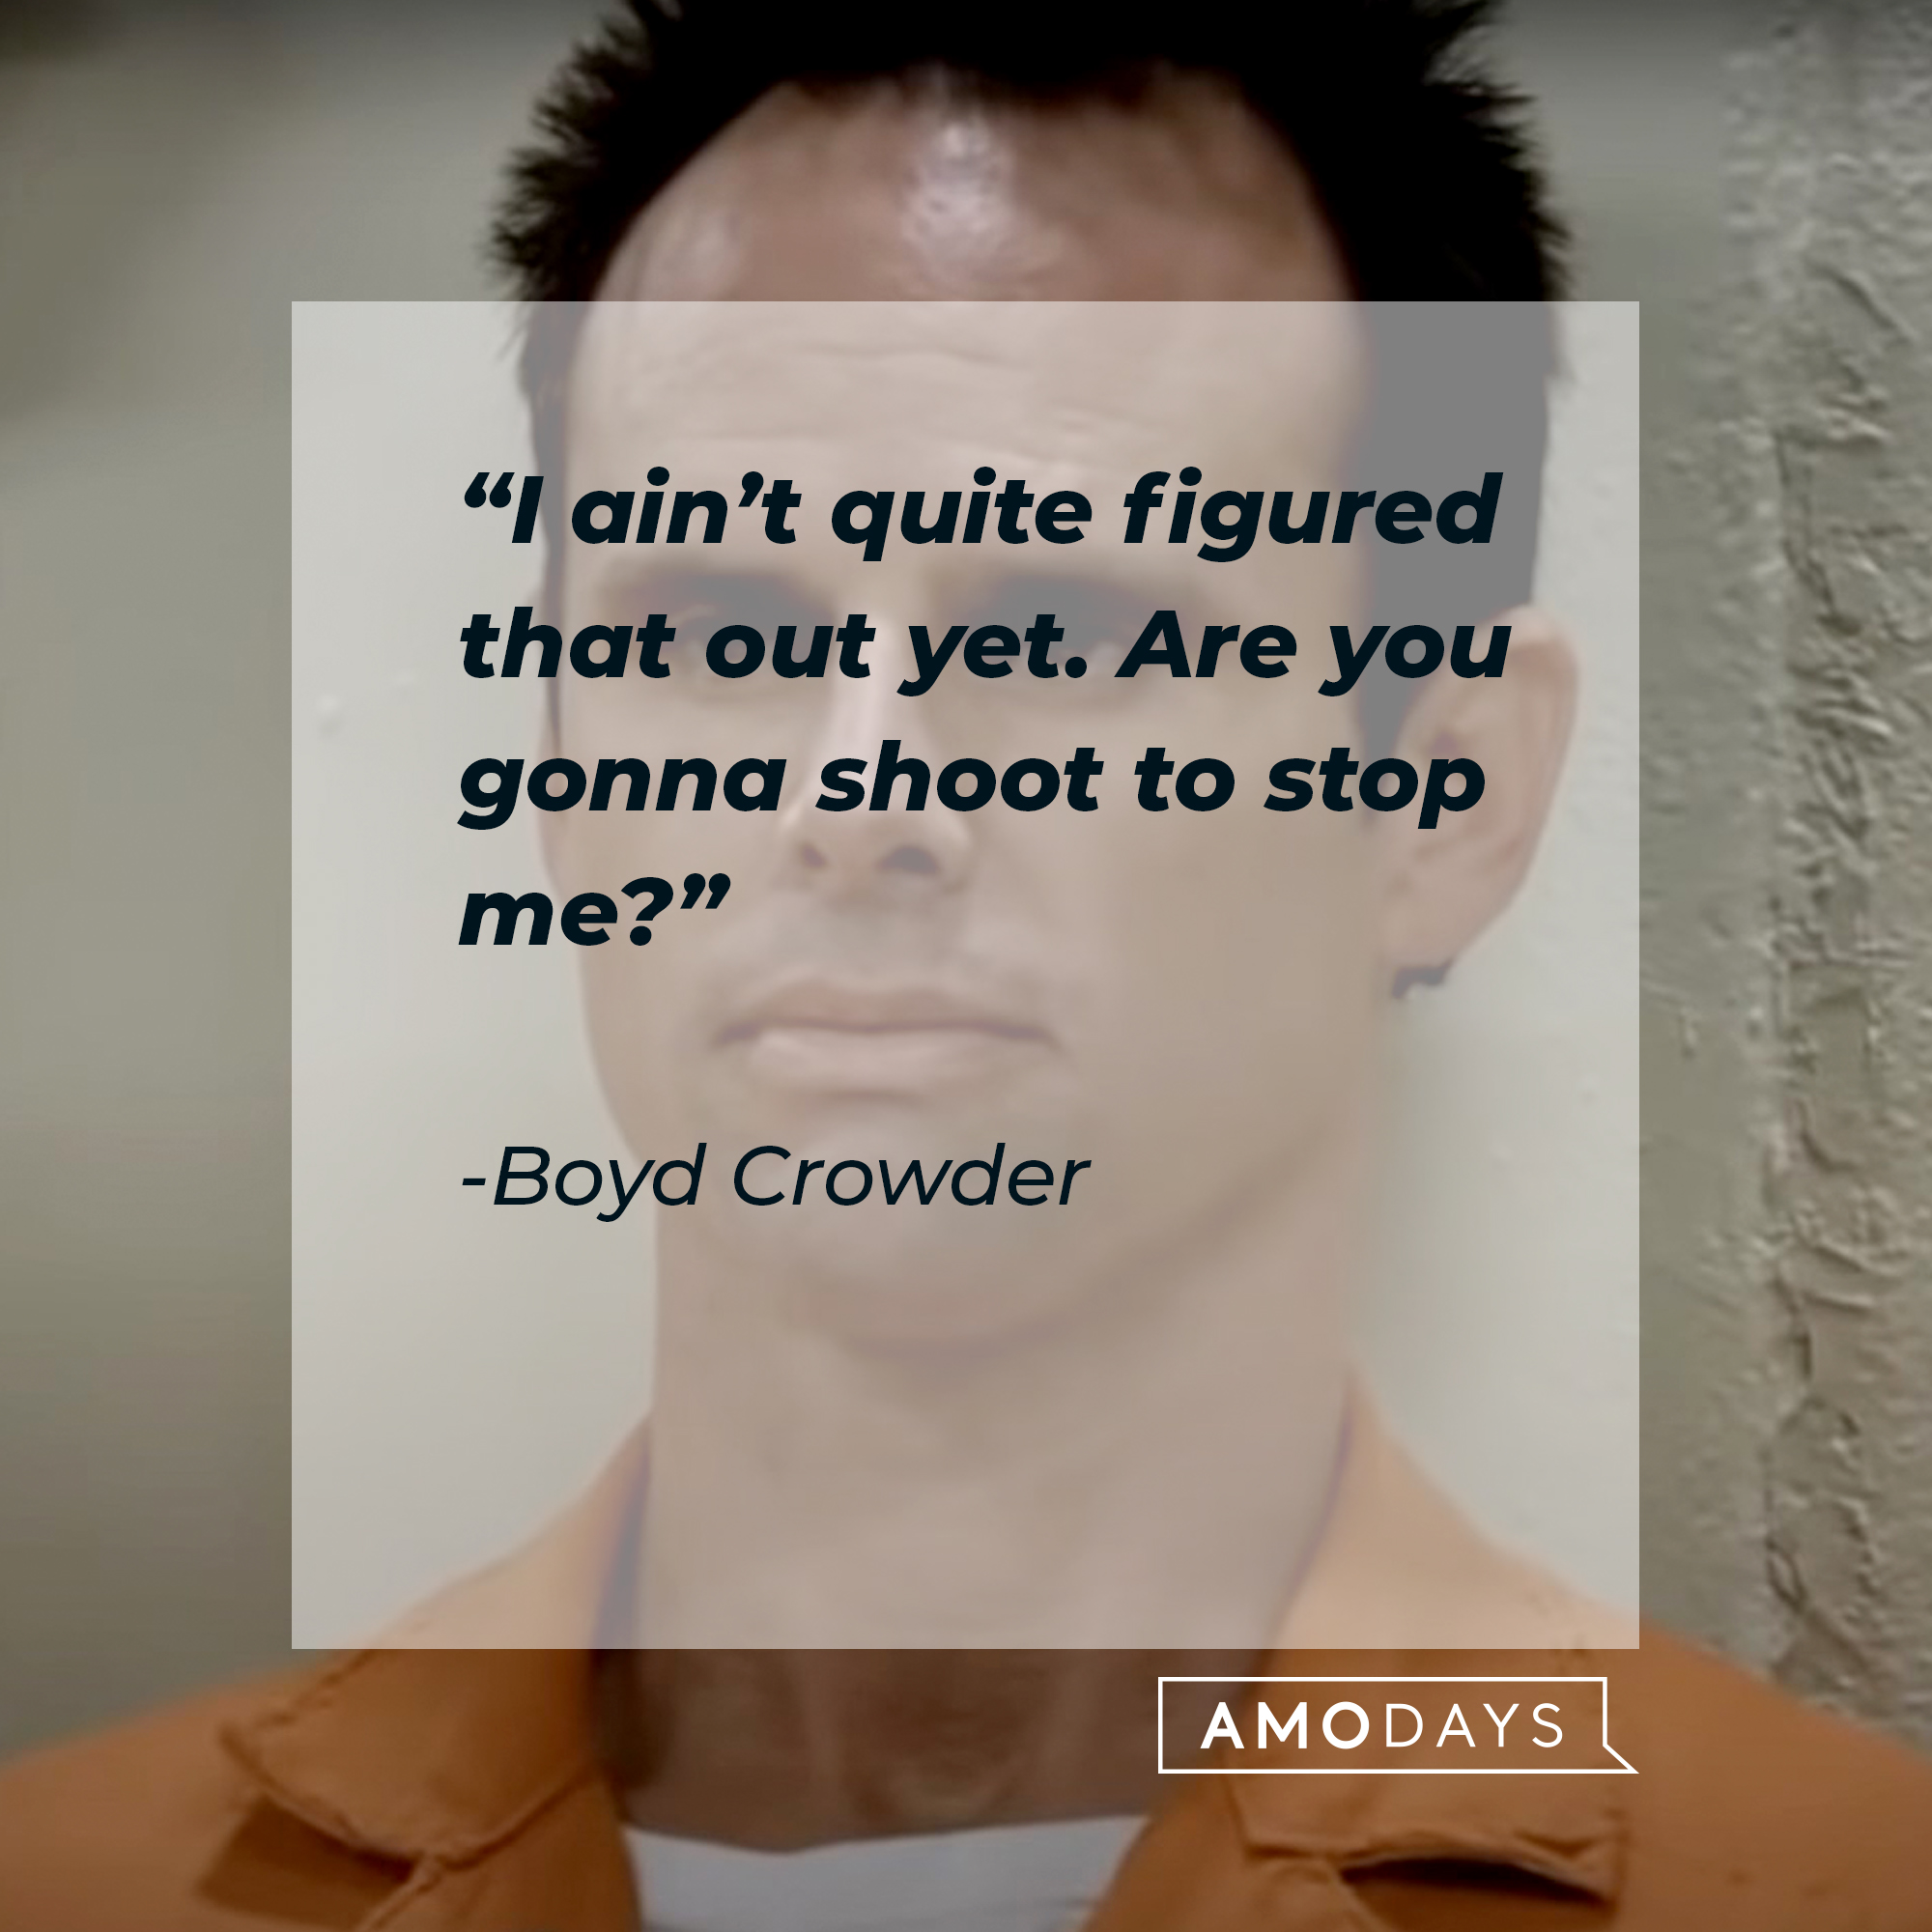 An image of  Boyd Crowder with his quote: “I ain’t quite figured that out yet. Are you gonna shoot to stop me?” | Source:  youtube.com/FXNetworks